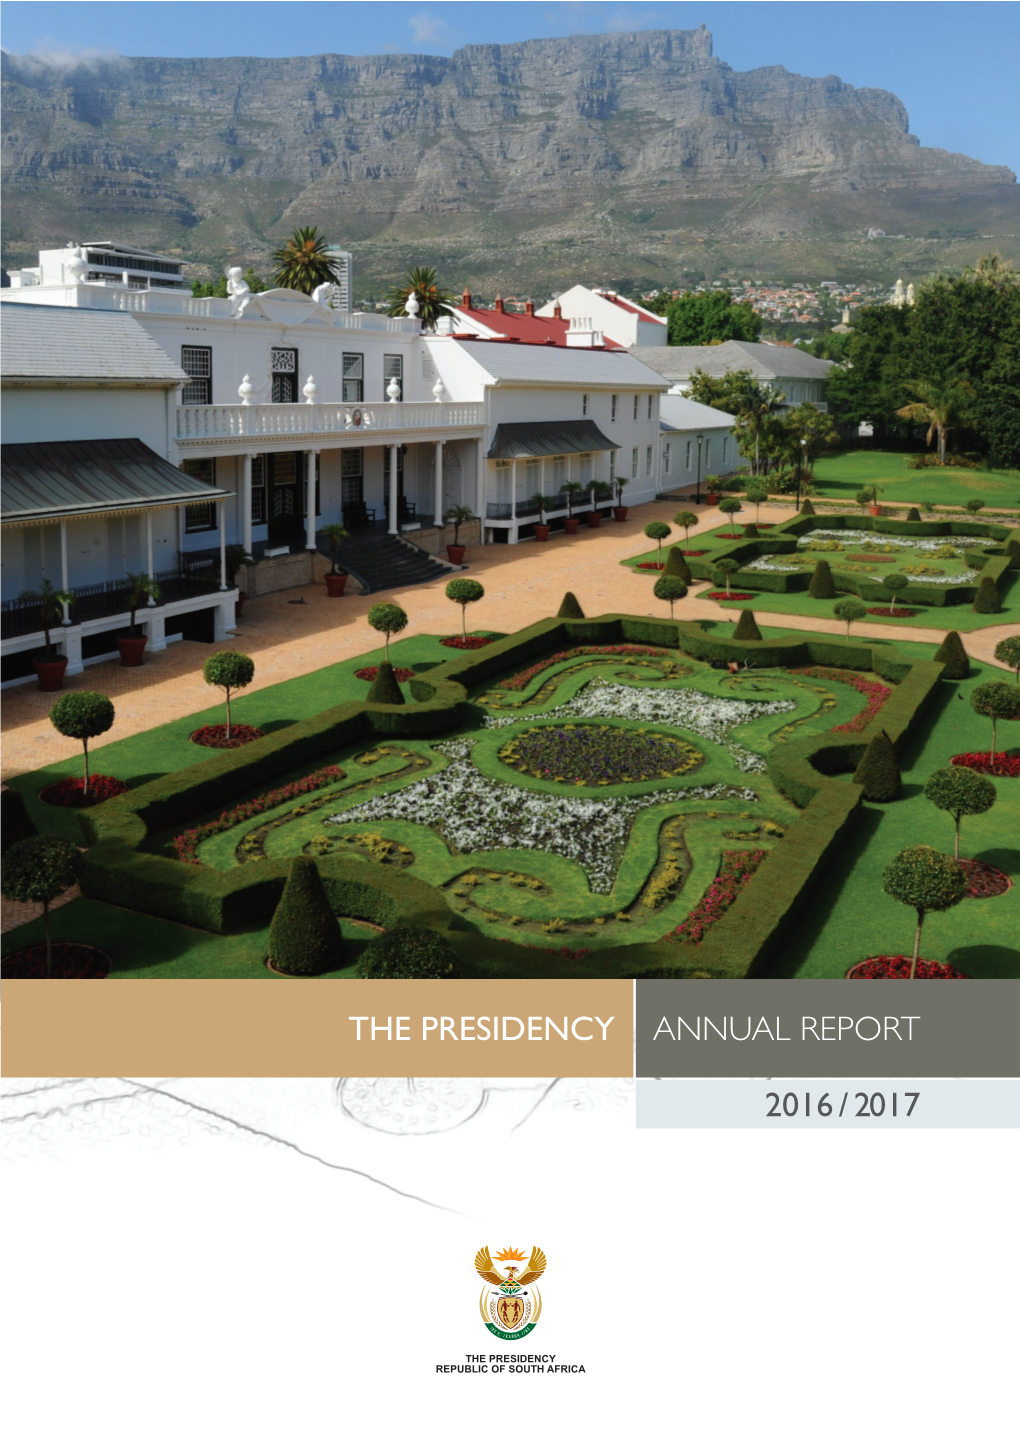 The Presidency Annual Report 2016 / 2017